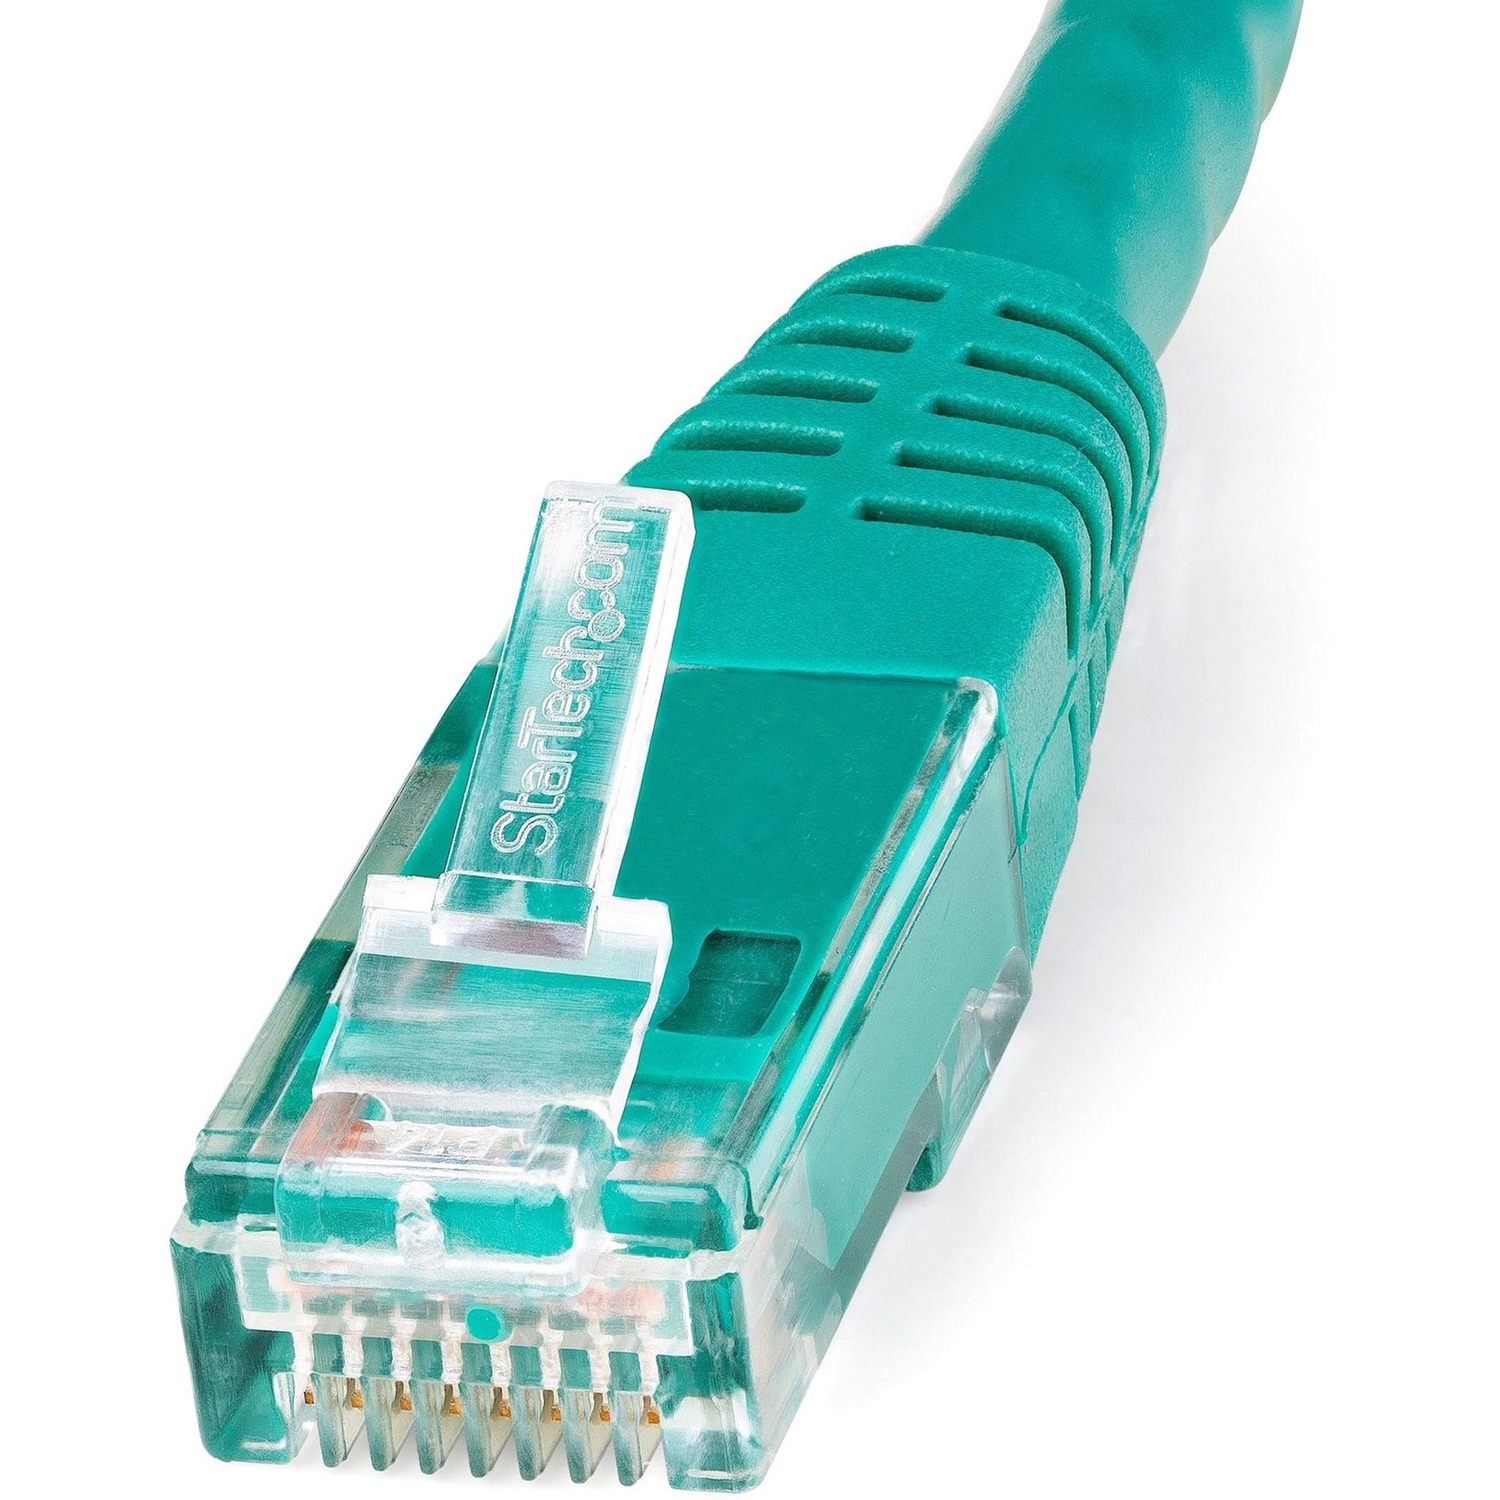 StarTech.com C6PATCH2GN 2 ft. Cat 6 Green Molded Cat6 UTP Patch Cable - image 2 of 3